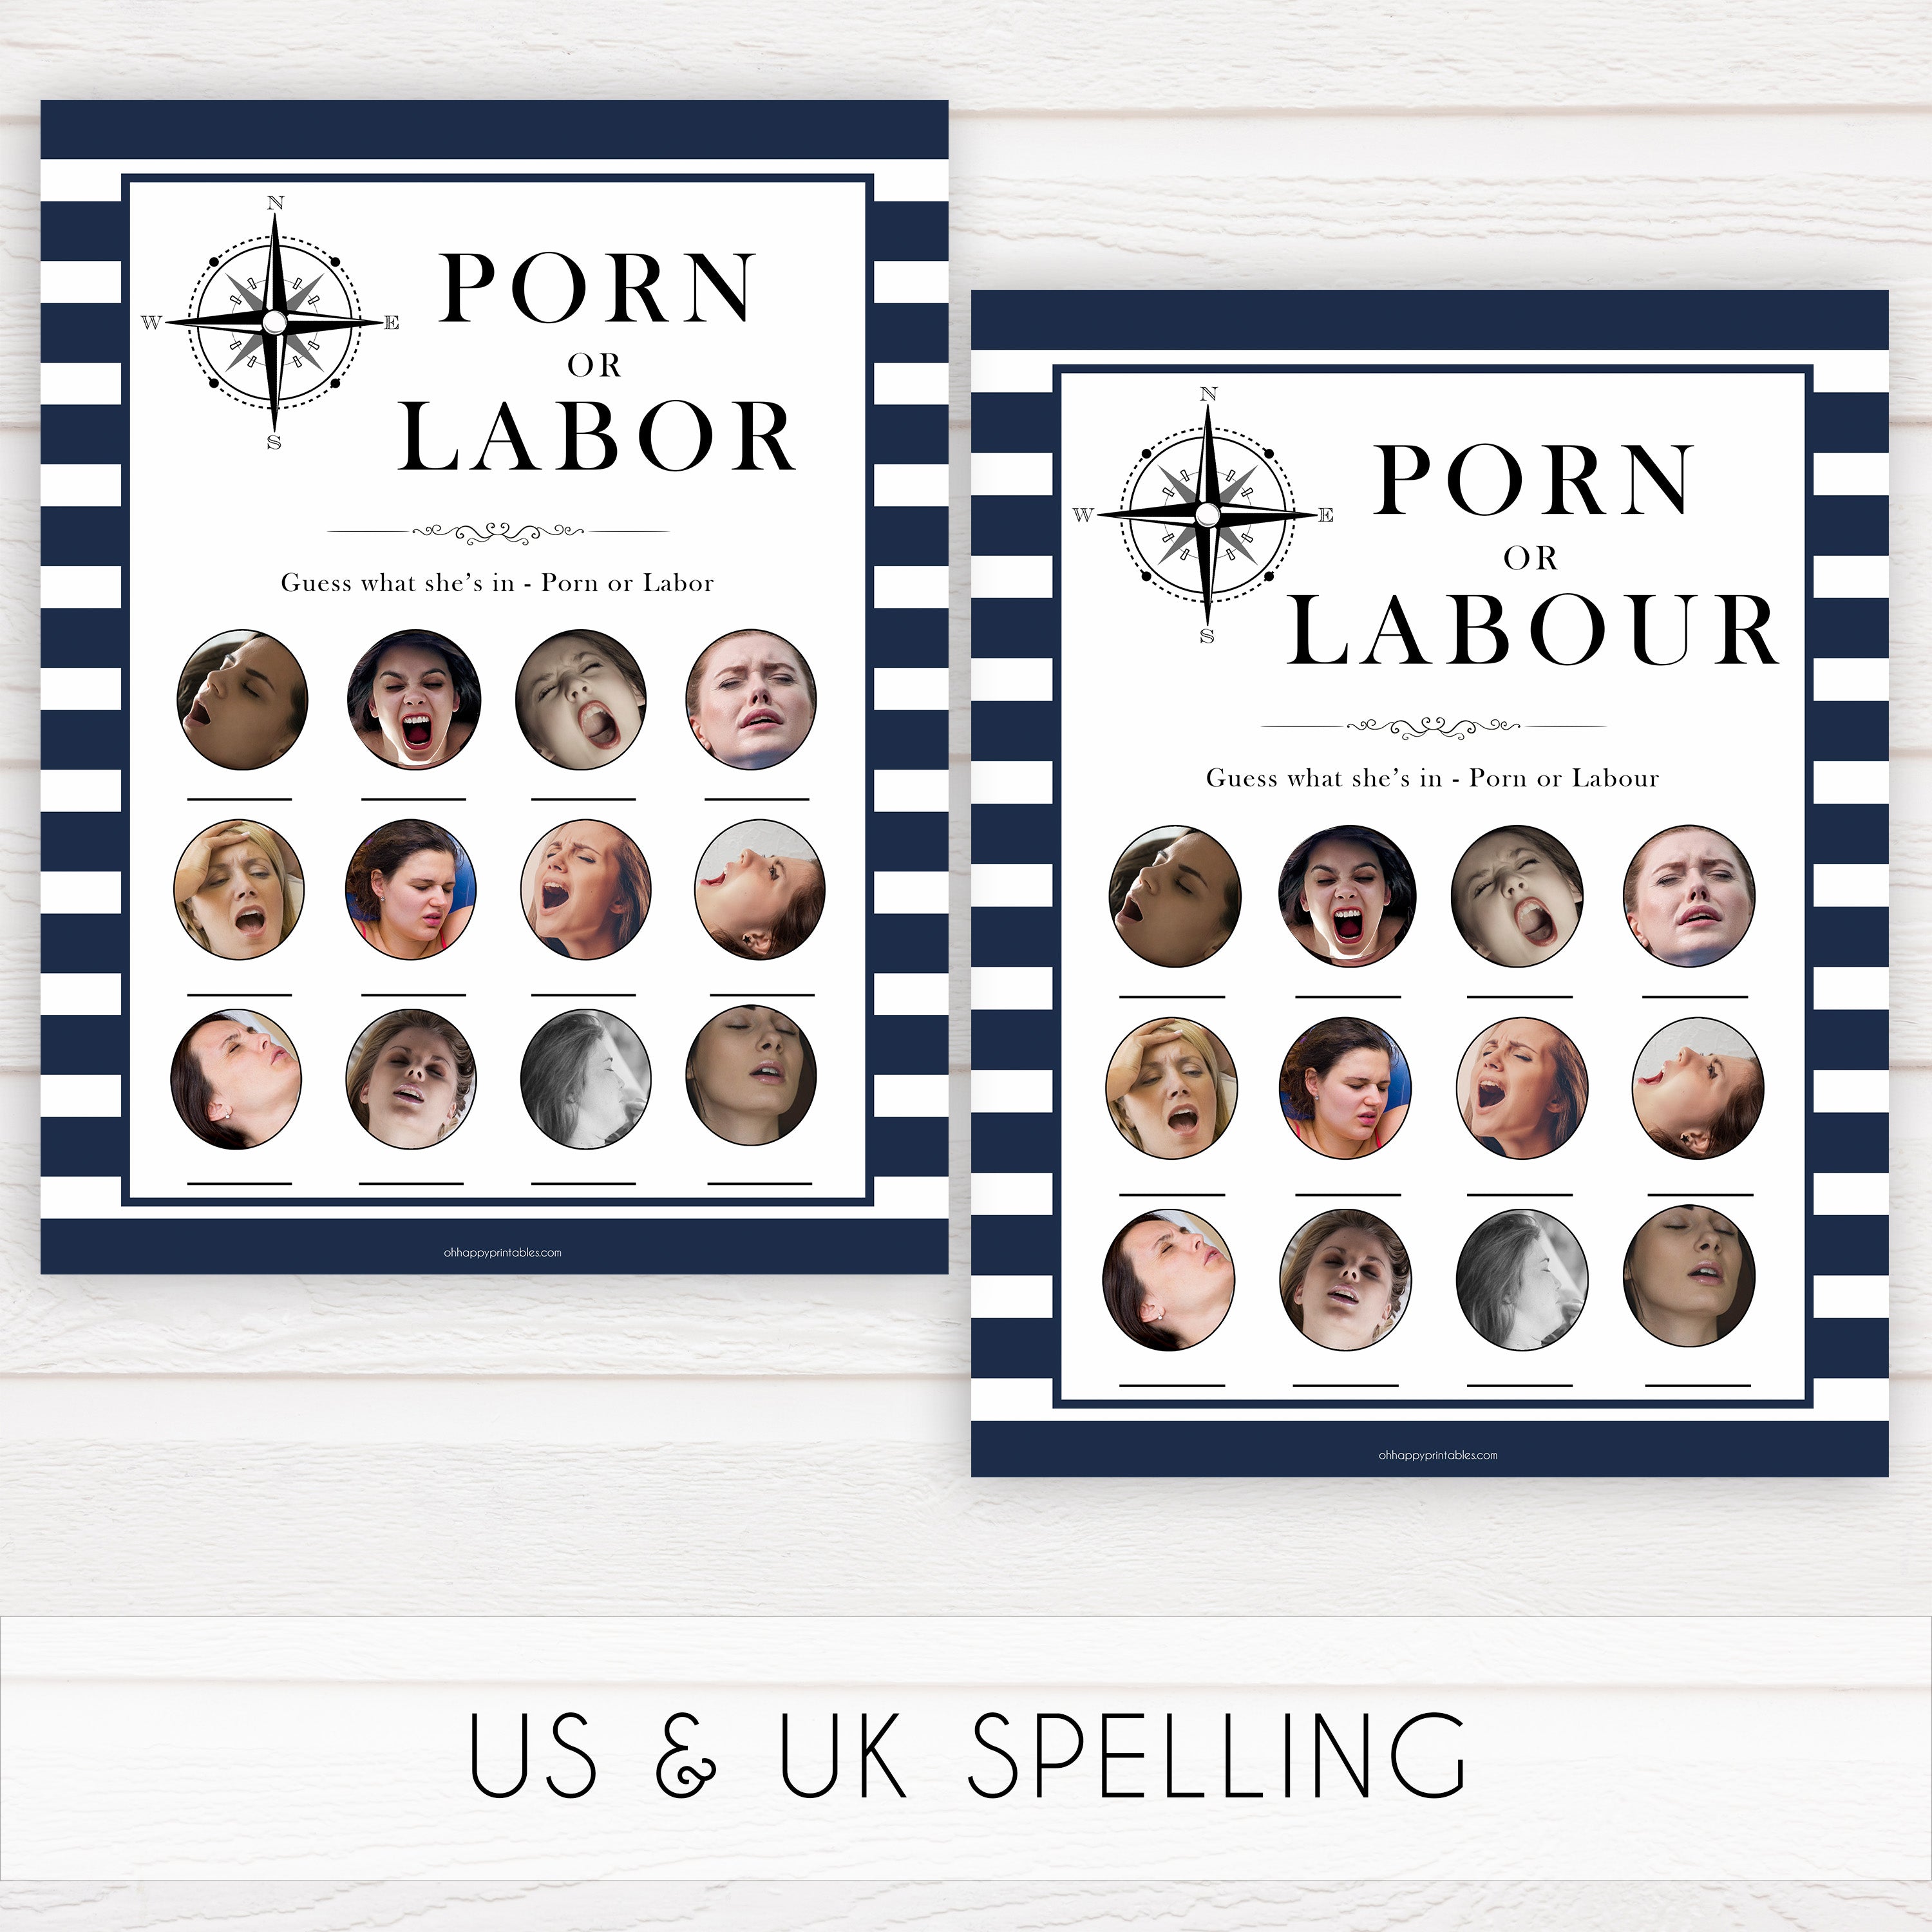 Nautical baby shower games, Porn or Labour, labor or porn baby shower games, printable baby shower games, baby shower games, fun baby games, ahoy its a boy, popular baby shower games, sailor baby games, boat baby games